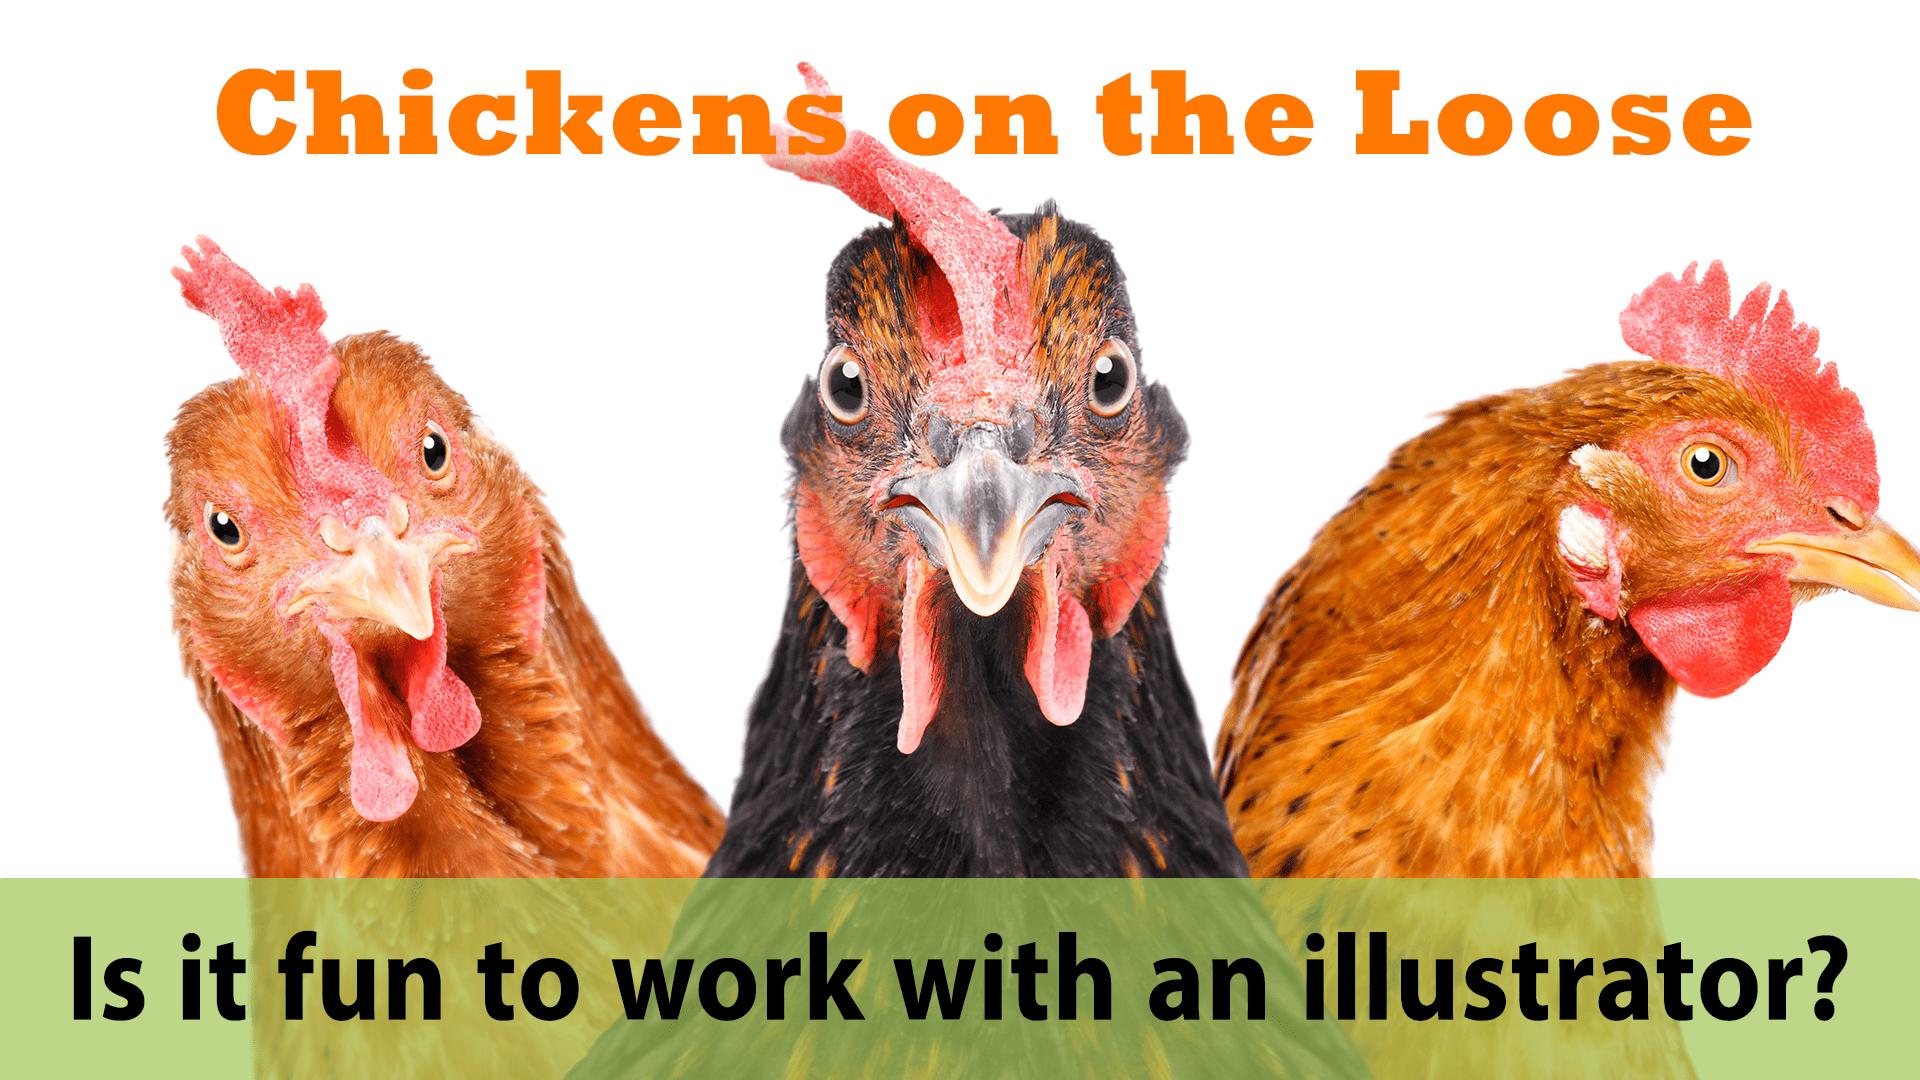 Chickens on the Loose - Is it fun working with an illustrator?